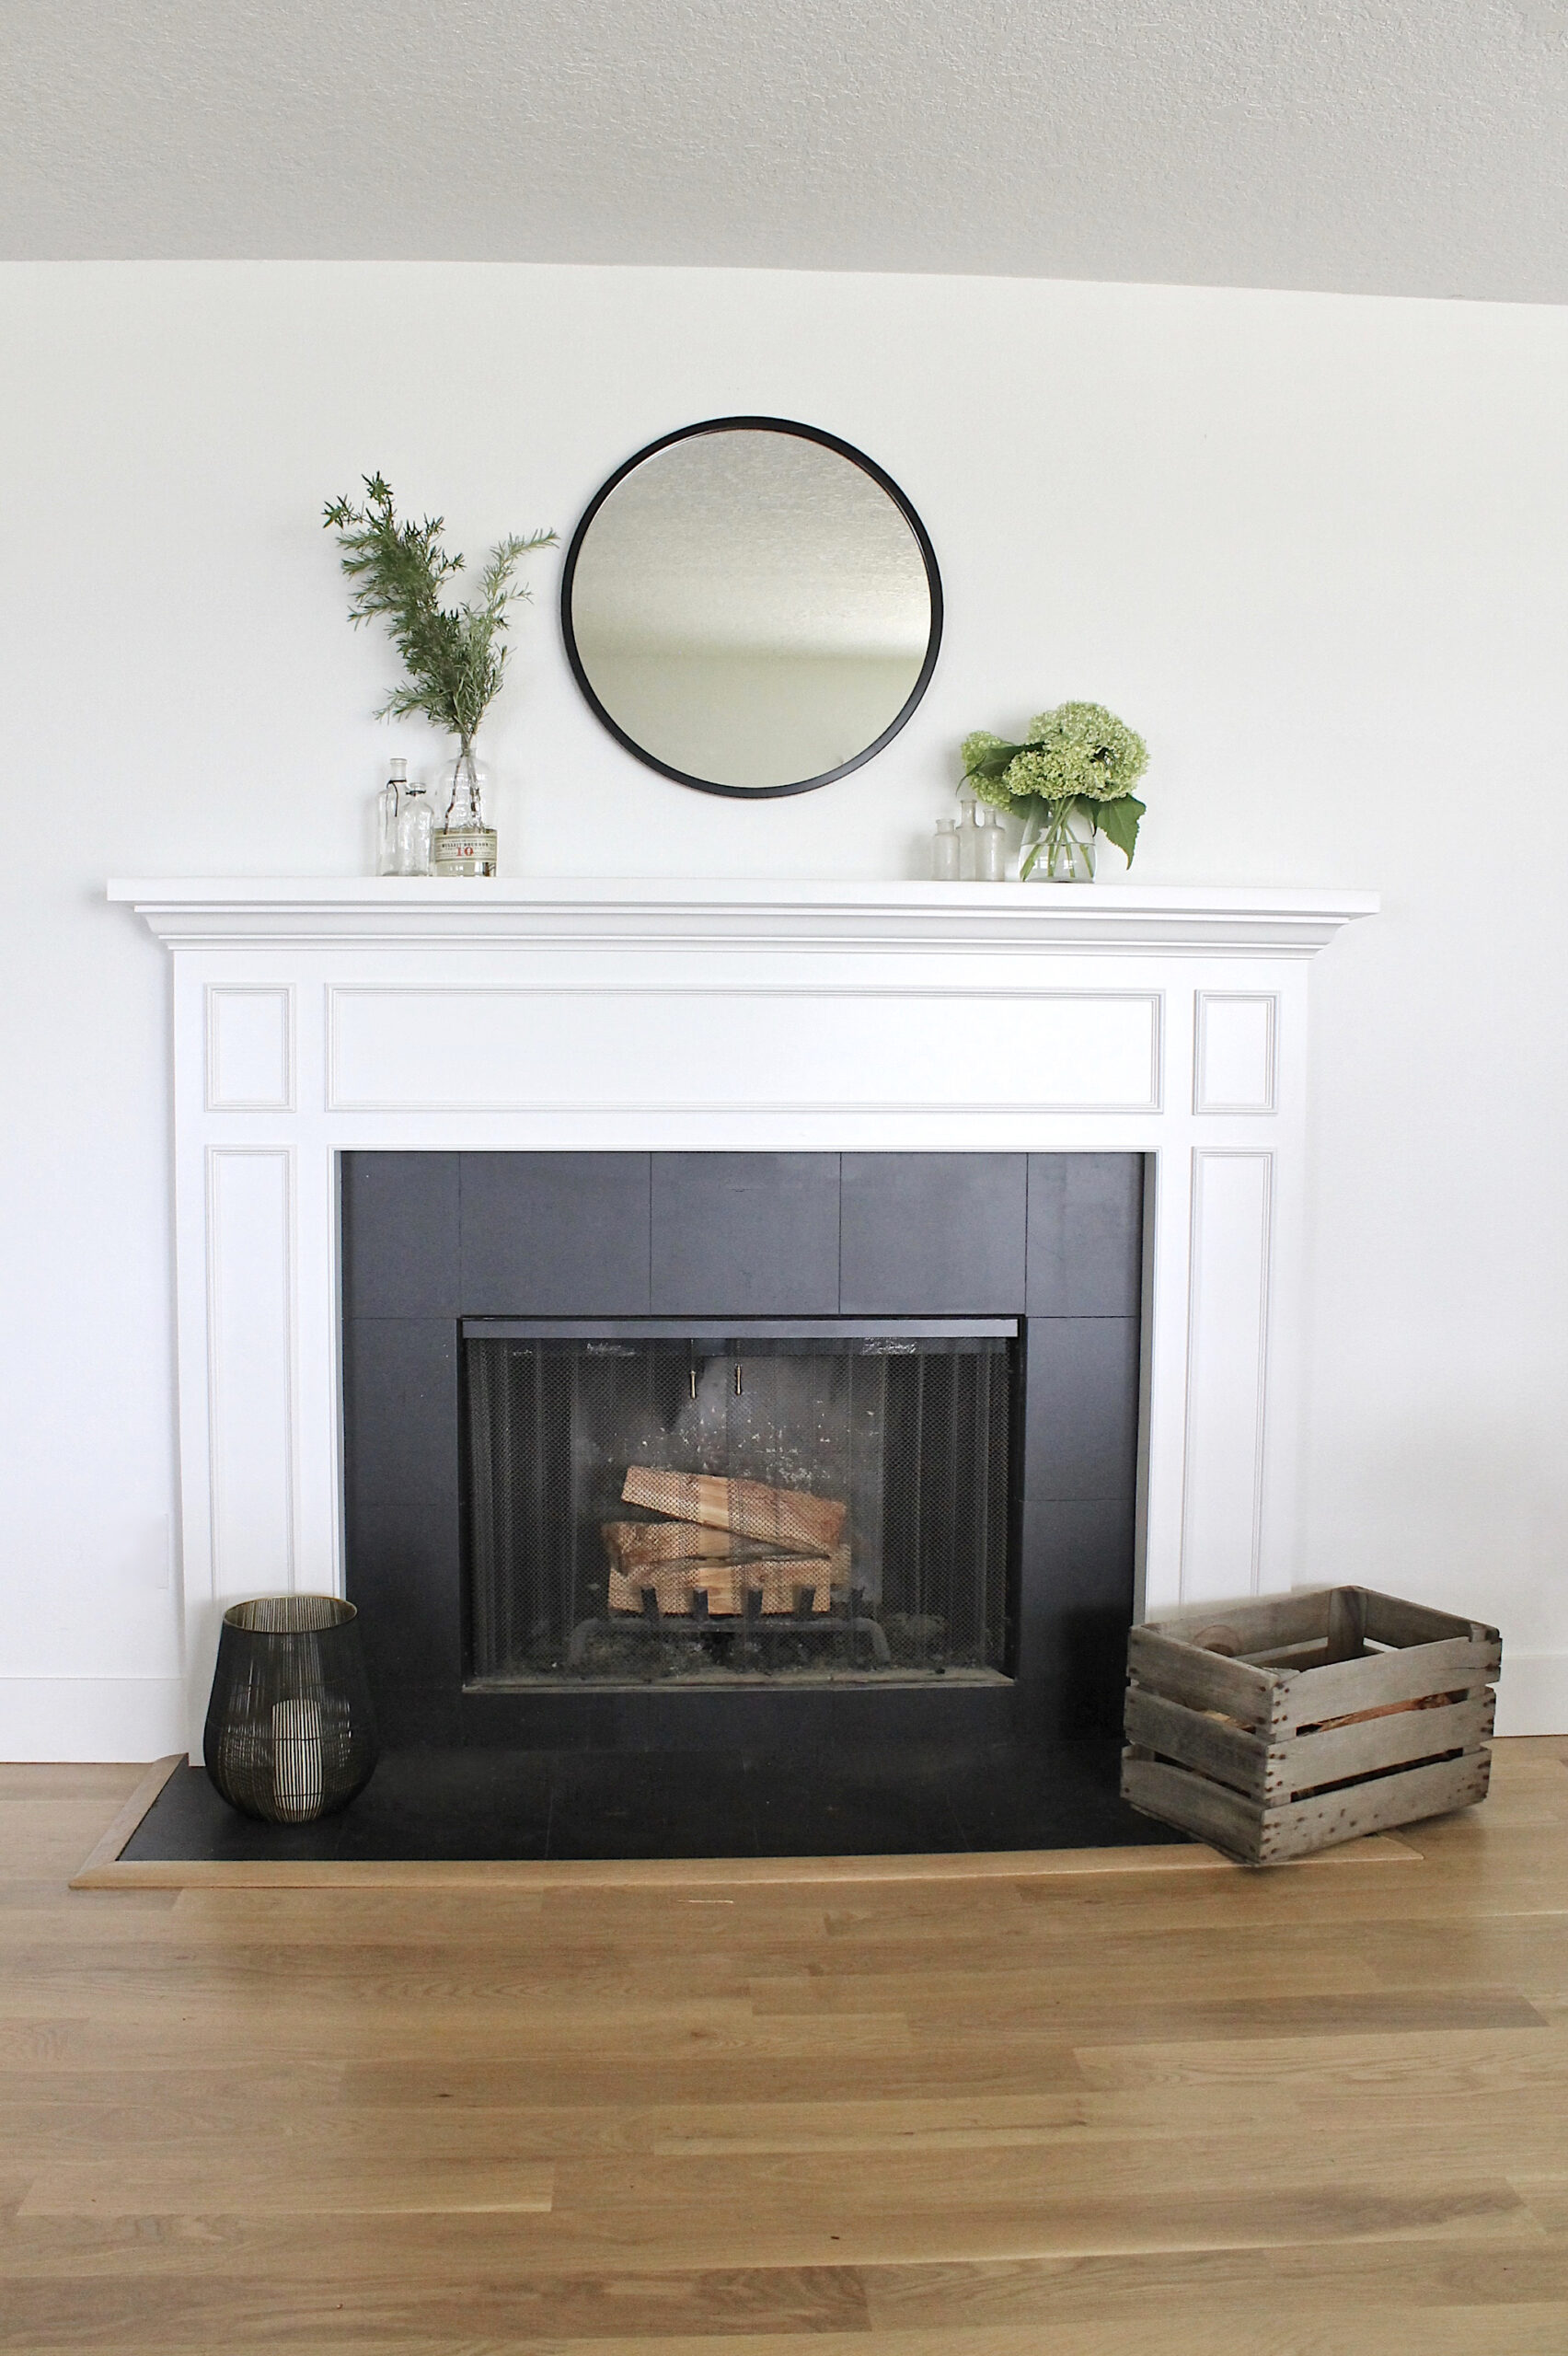 How To Paint A Ceramic Tile Fireplace, Paint Tile Around Gas Fireplace